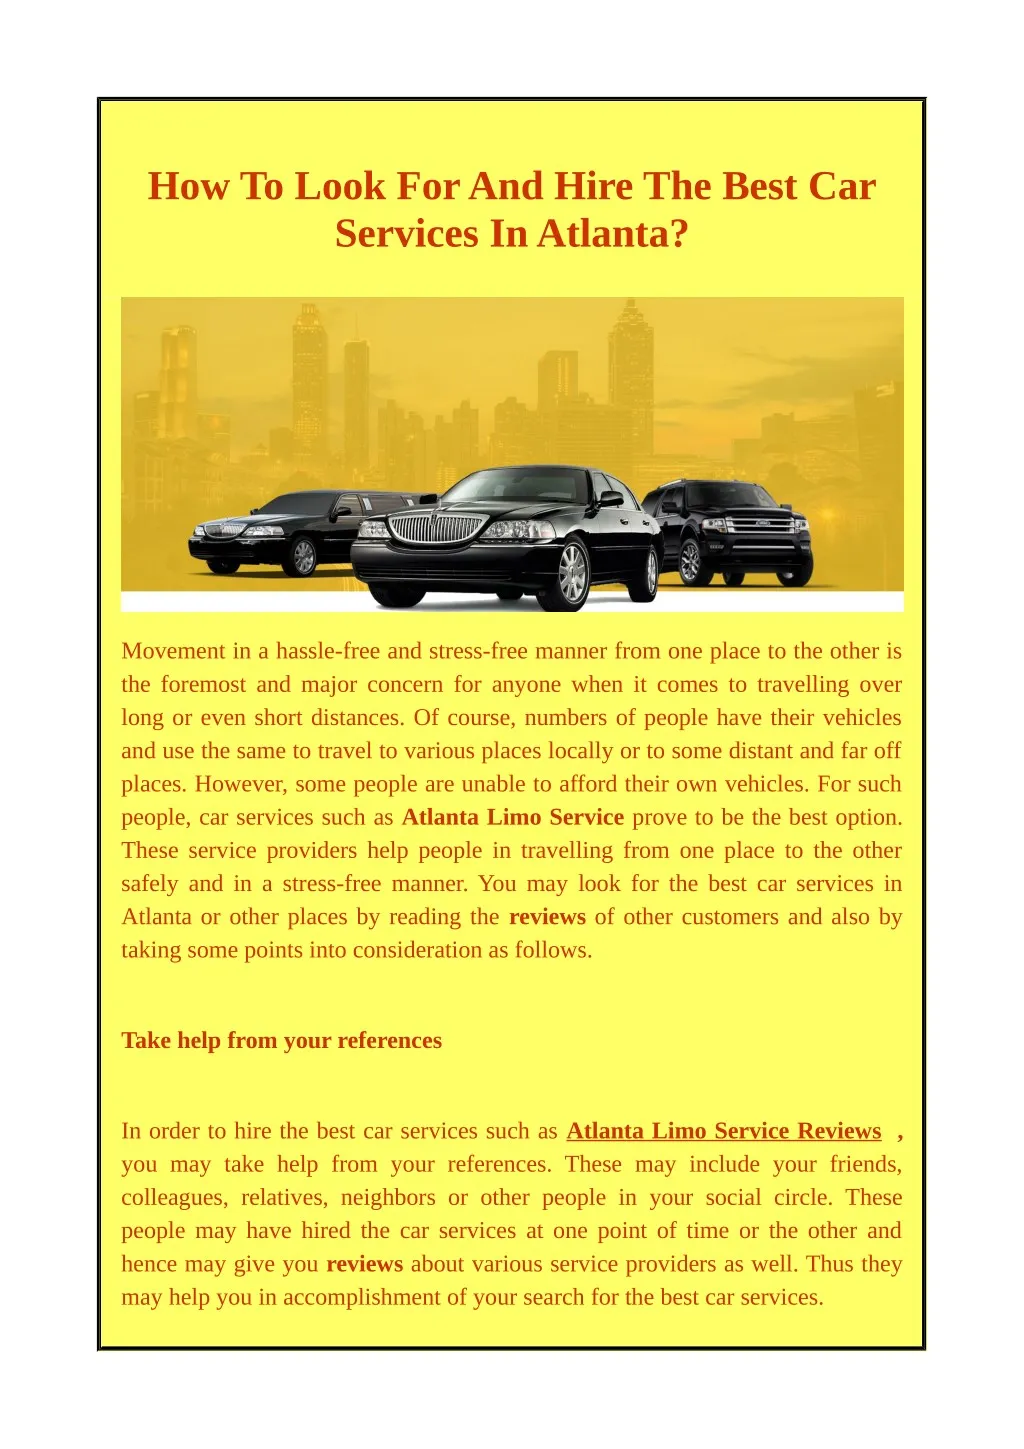 how to look for and hire the best car services